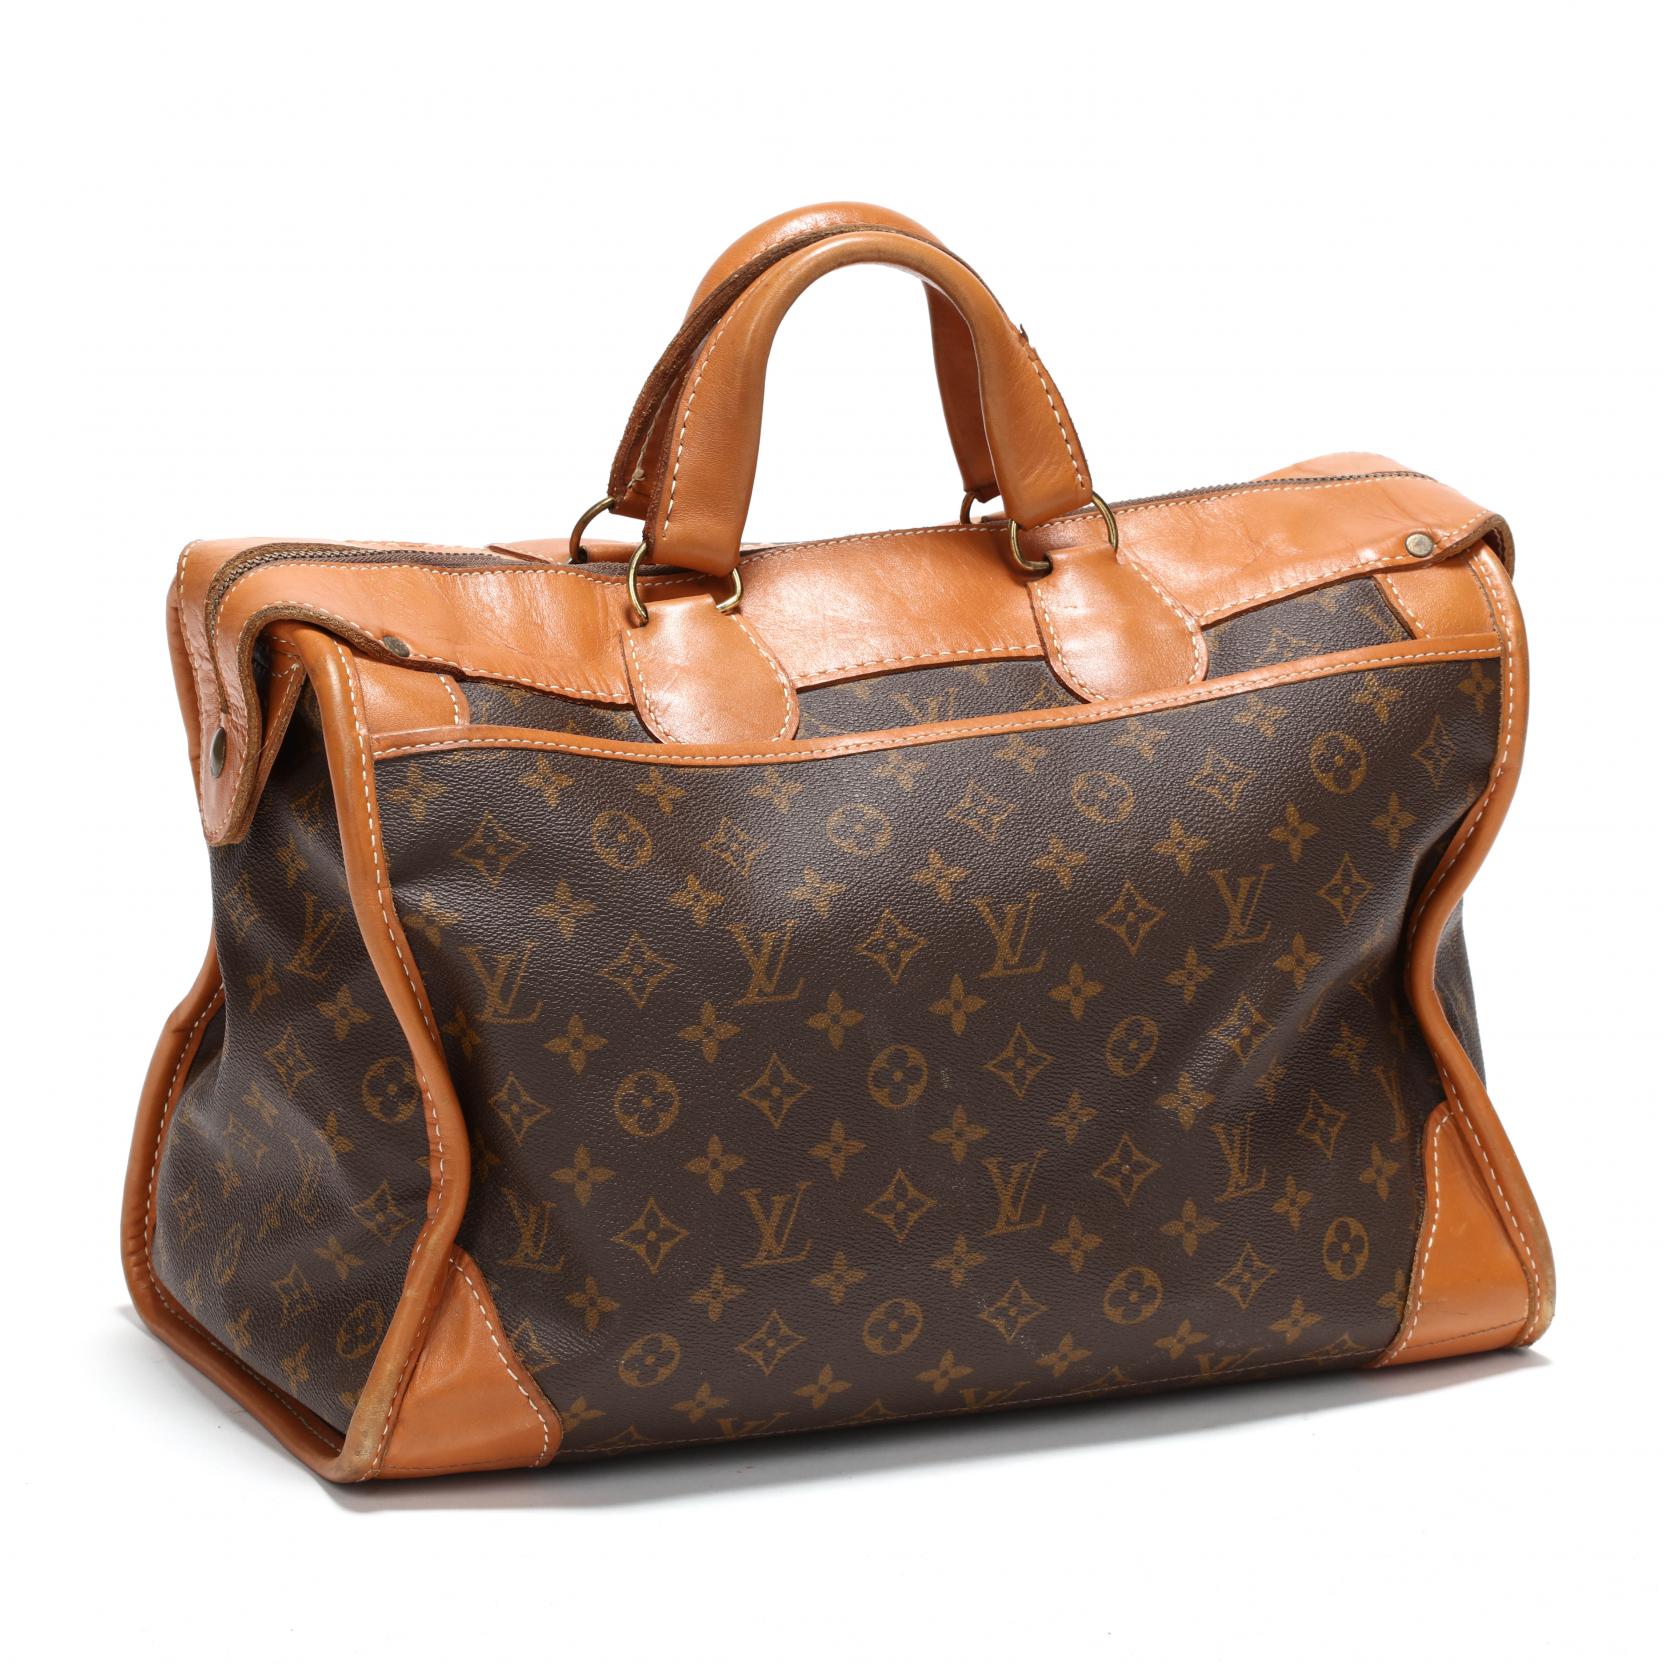 Sold at Auction: Louis Vuitton Branded Overnight Bag - Marked TH0916